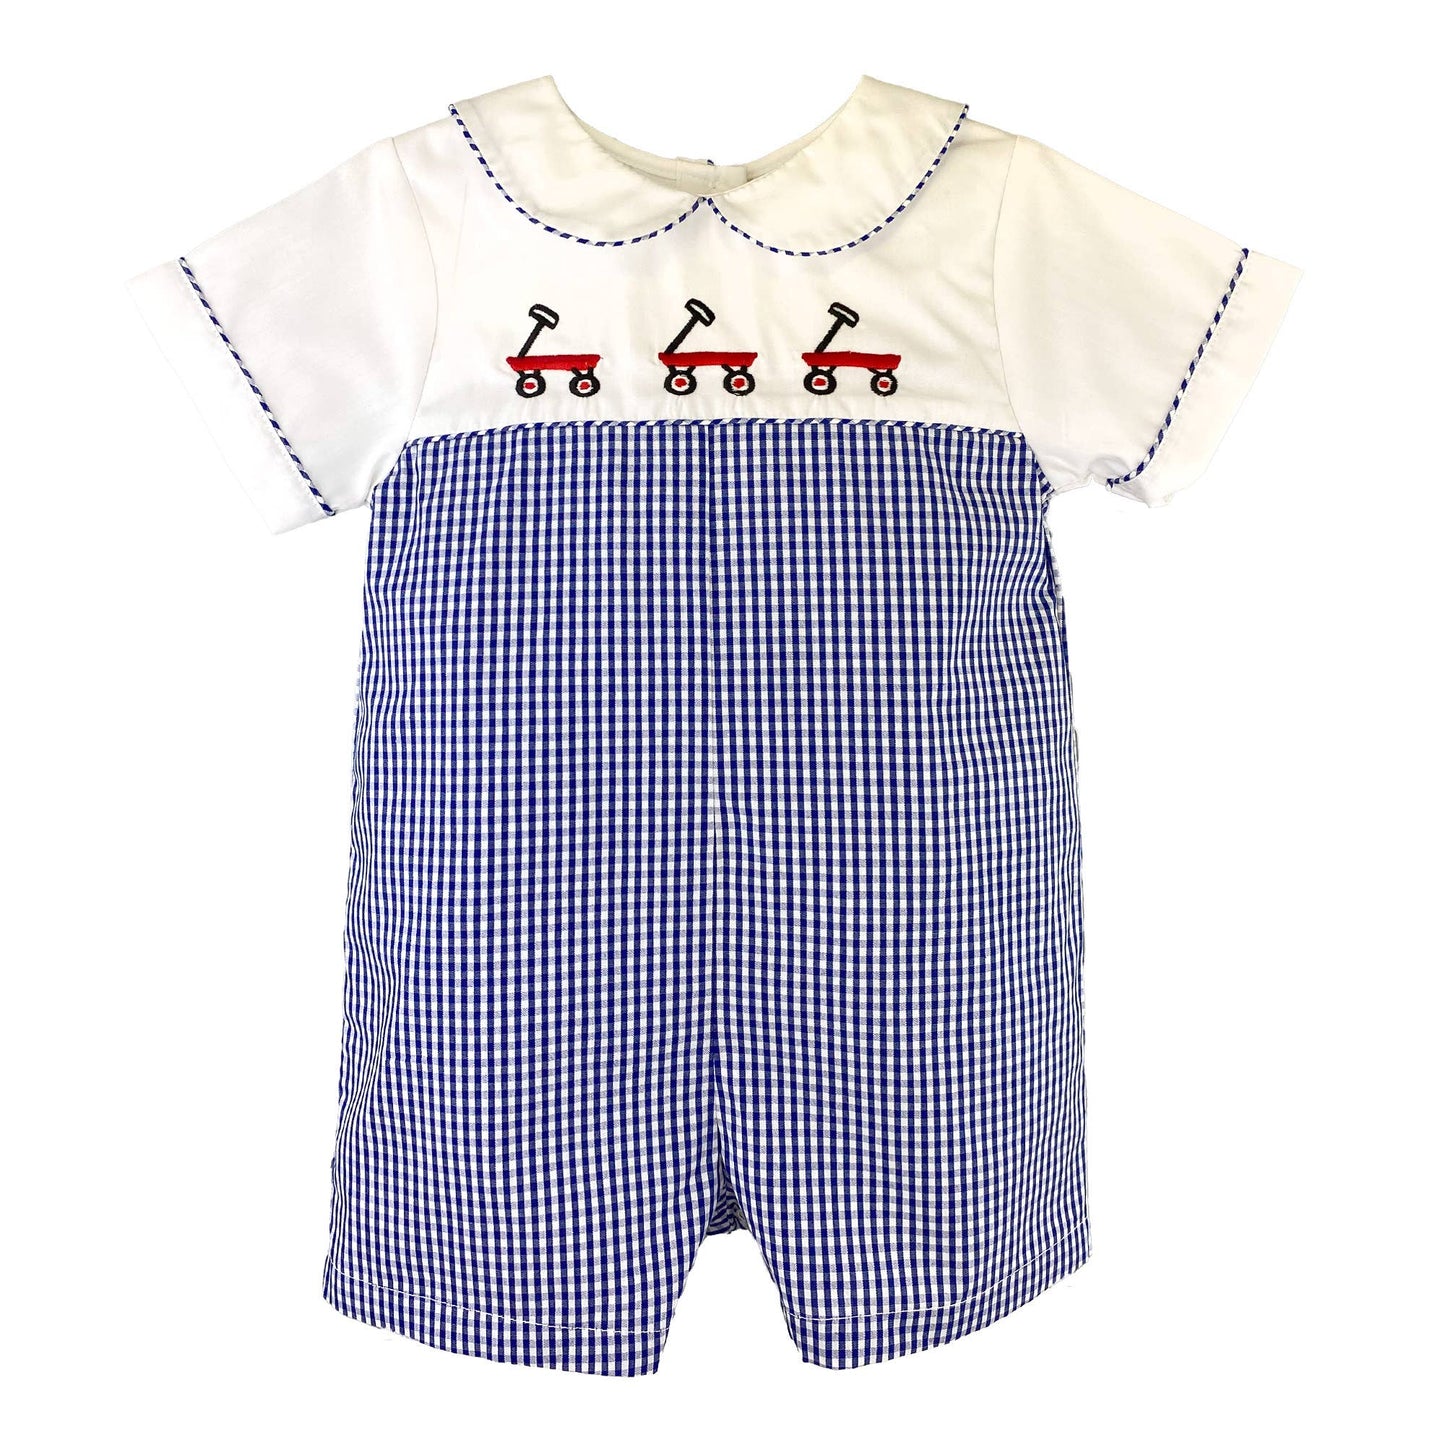 Red Wagon Embroidered Romper